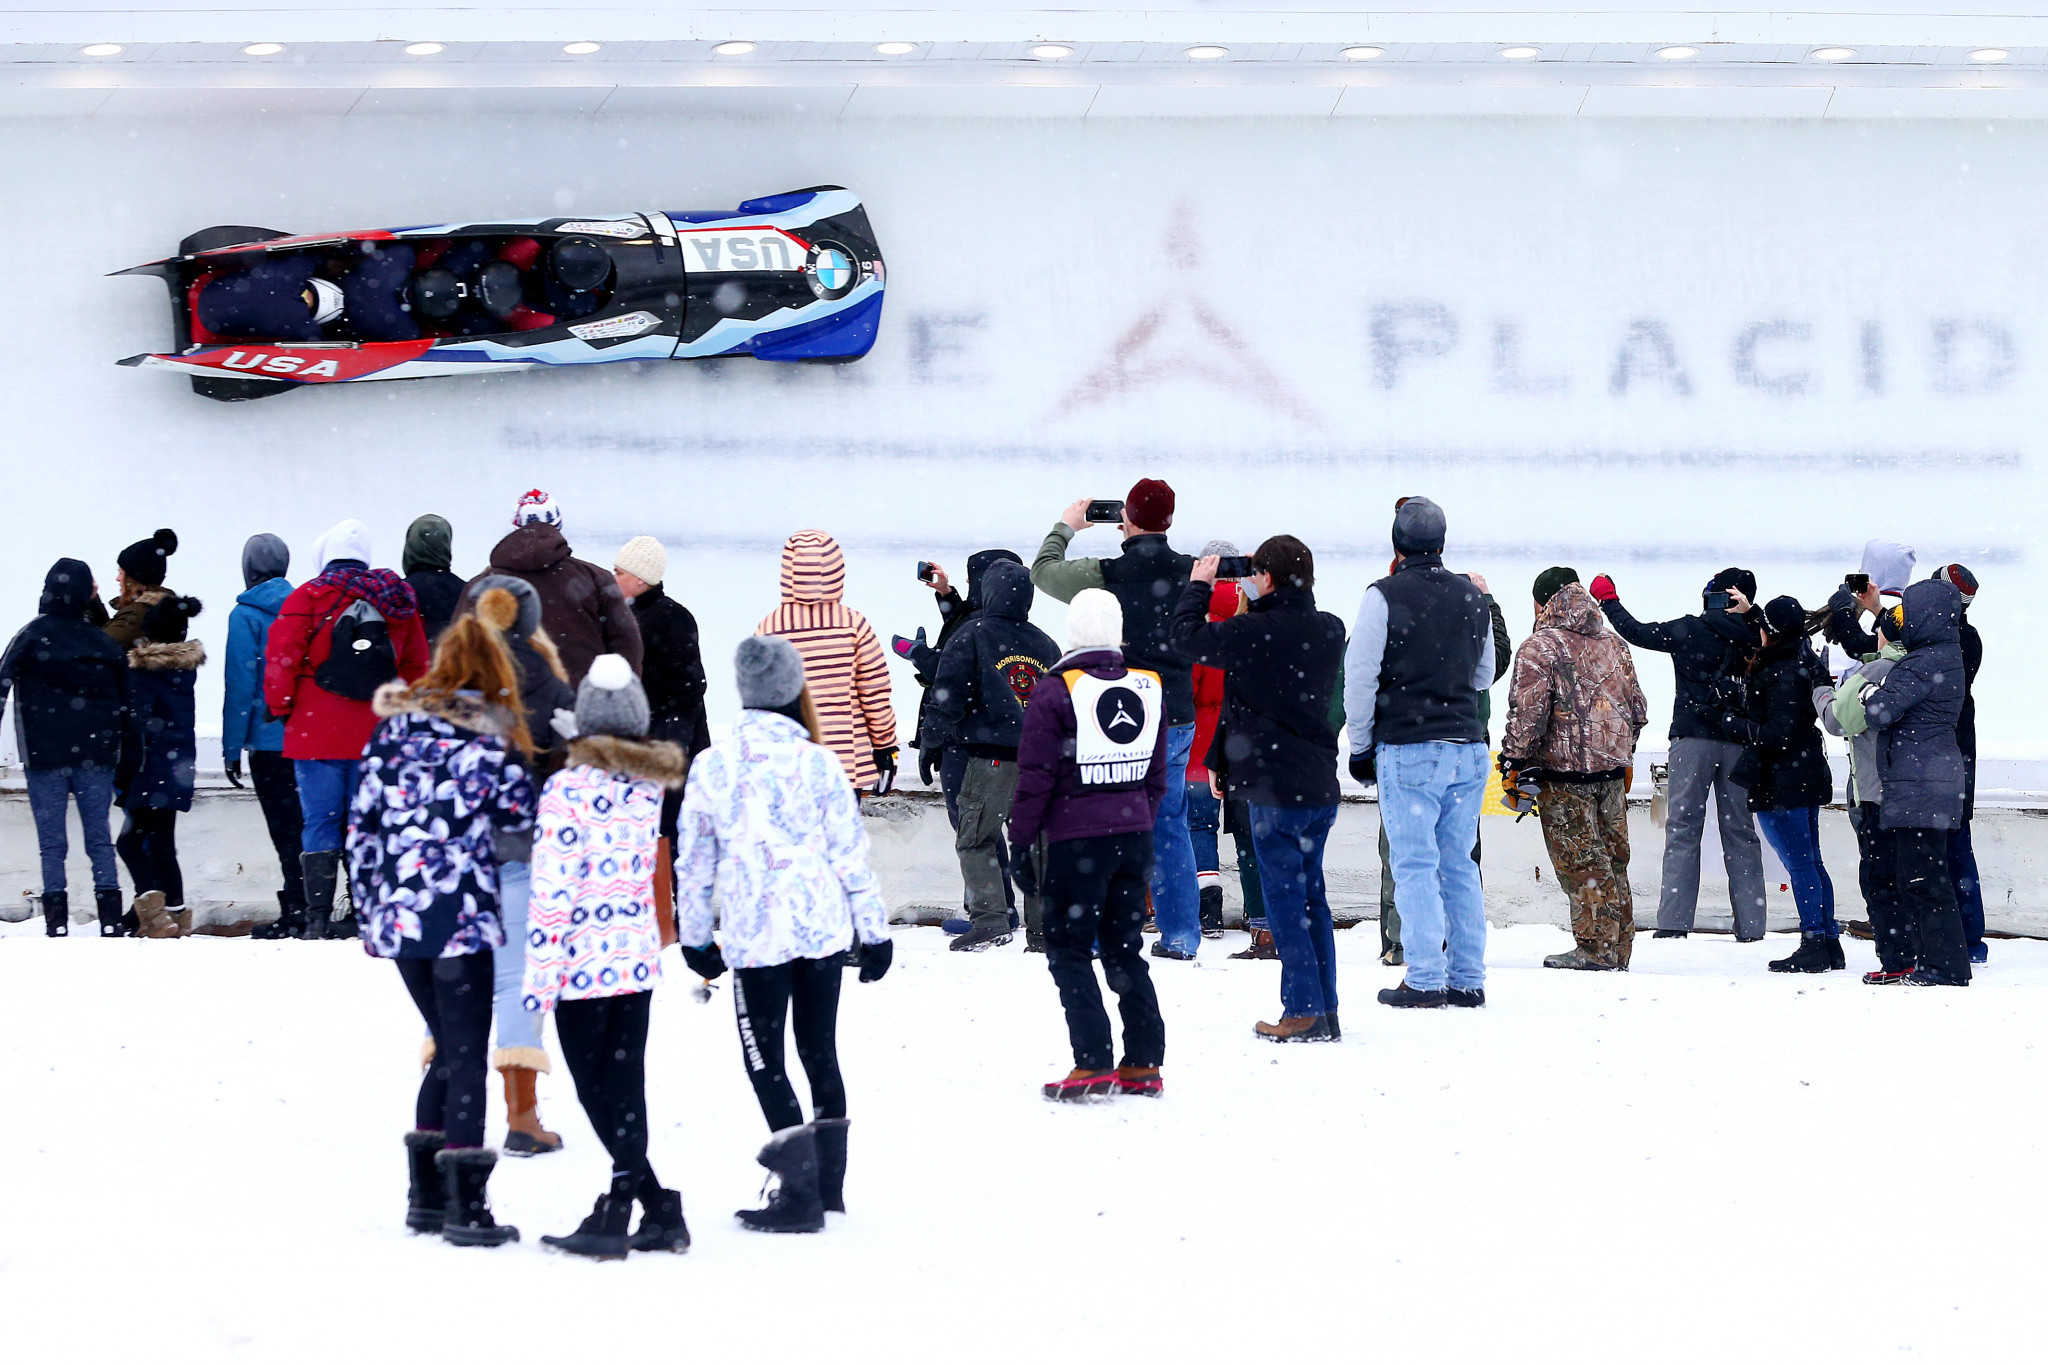 Lake Placid is set to host the FISU Winter World University Games in January next year ©Getty Images